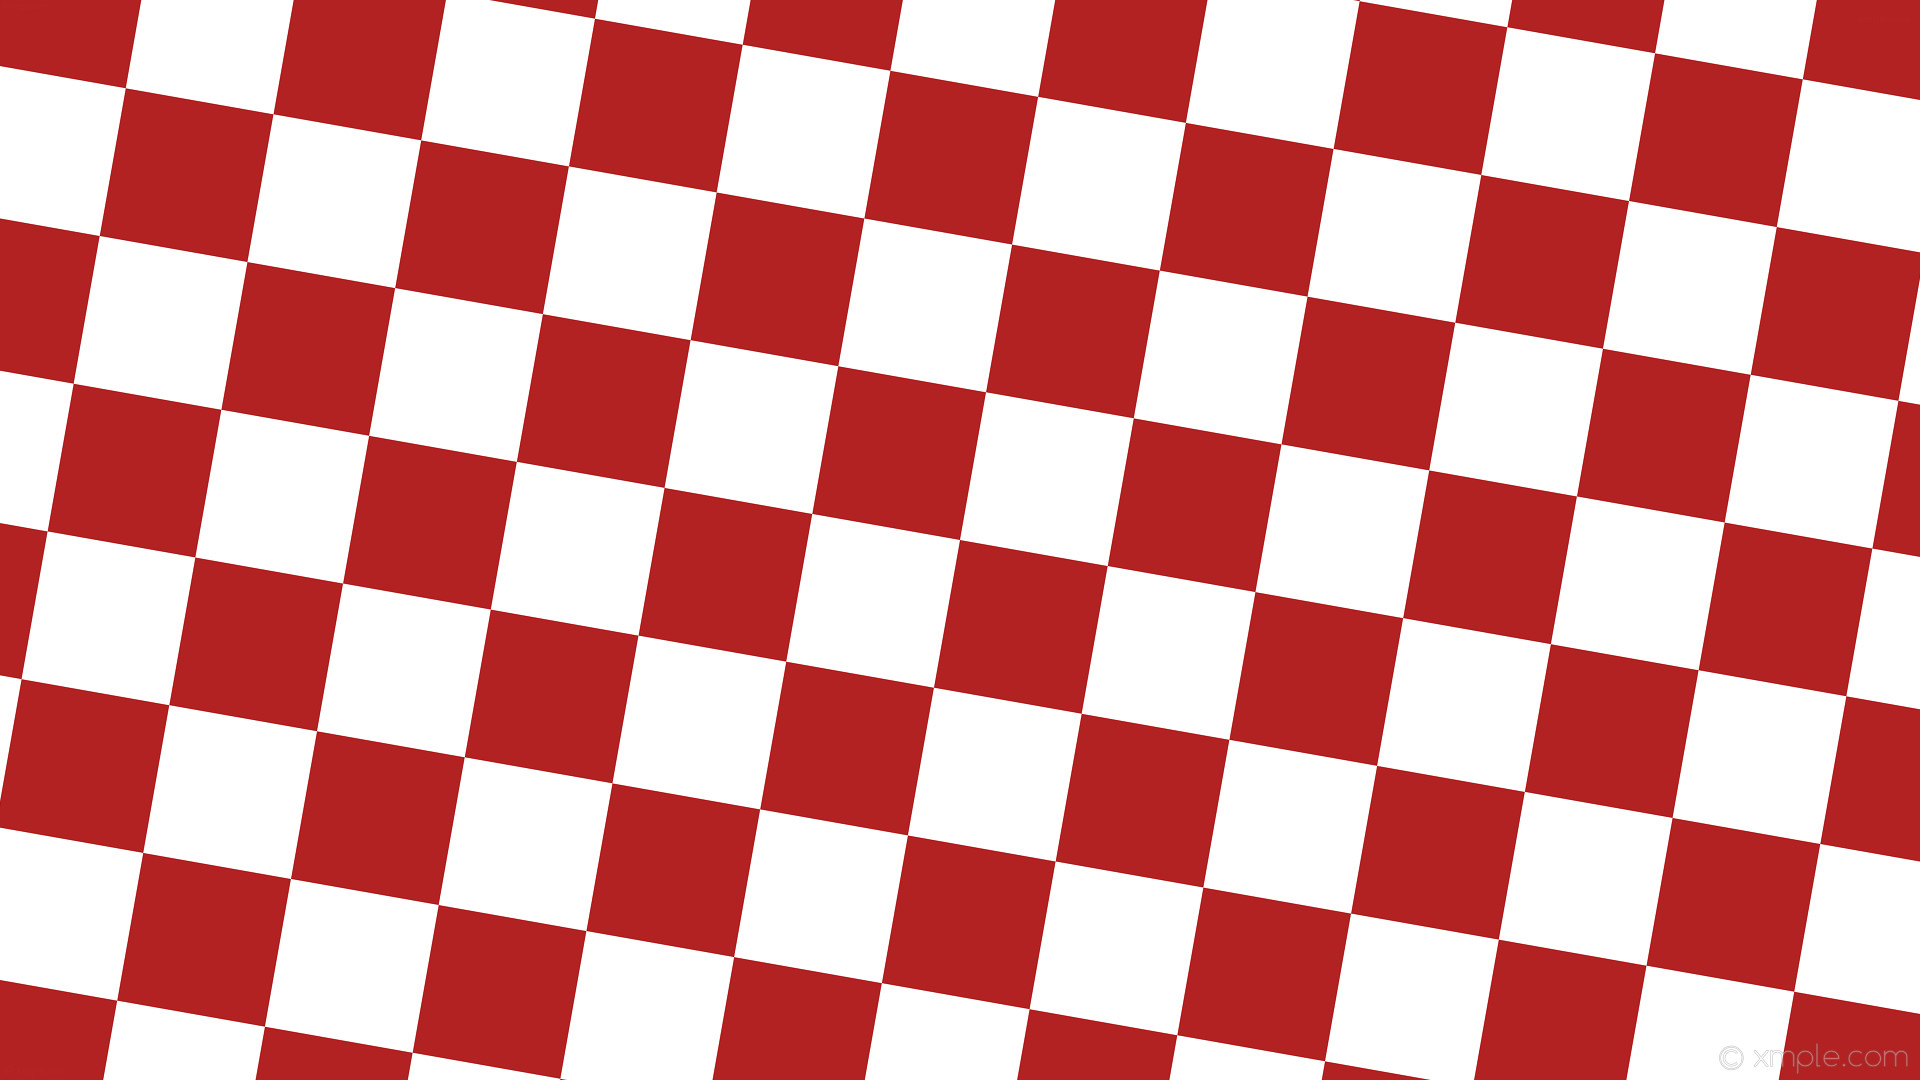 Red And White Checkered Wallpaper.